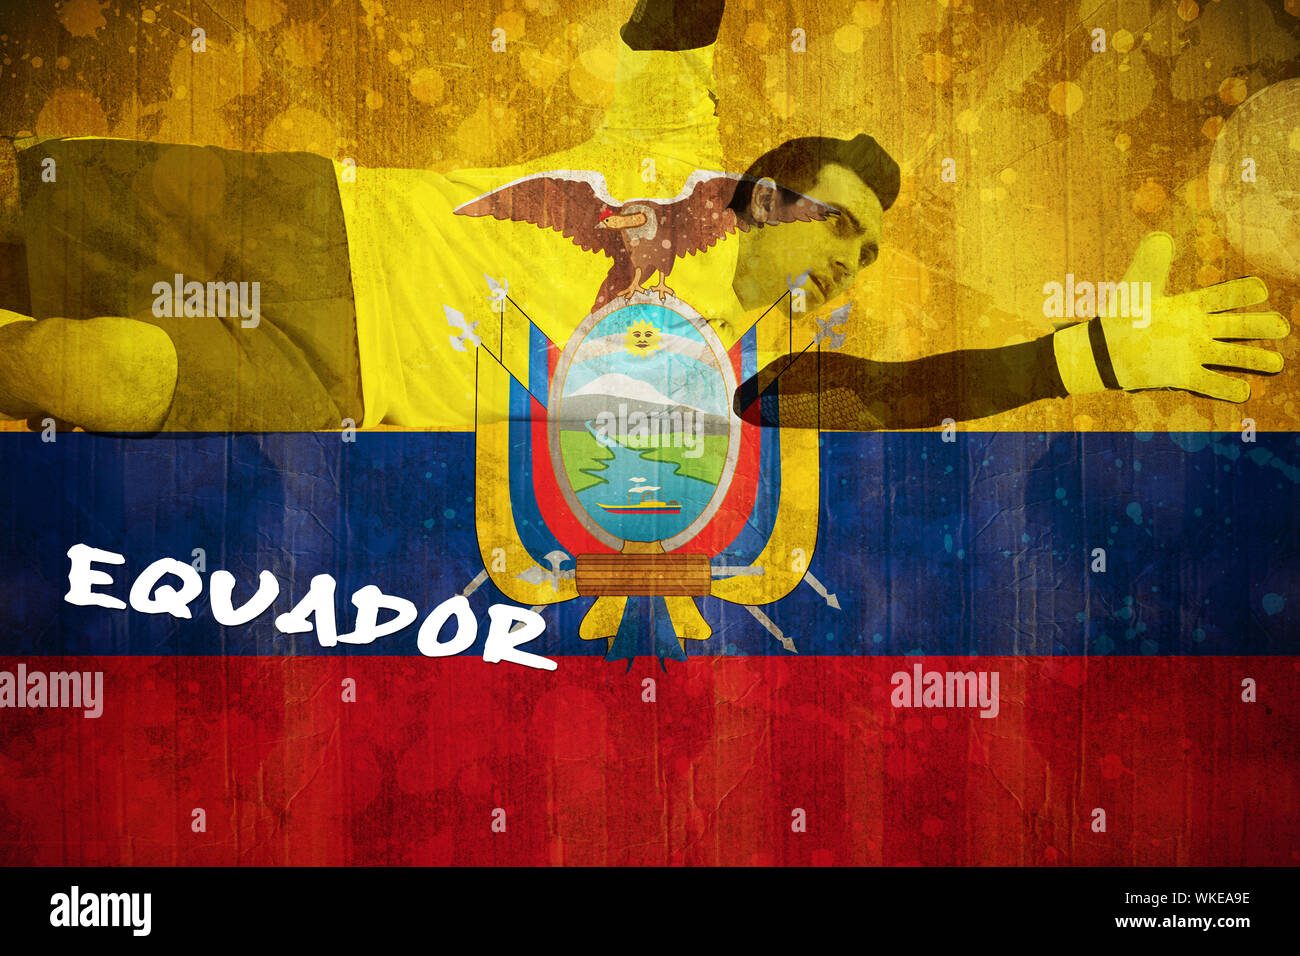 Goalkeeper in yellow making a save against ecuador flag in grunge effect Stock Photo